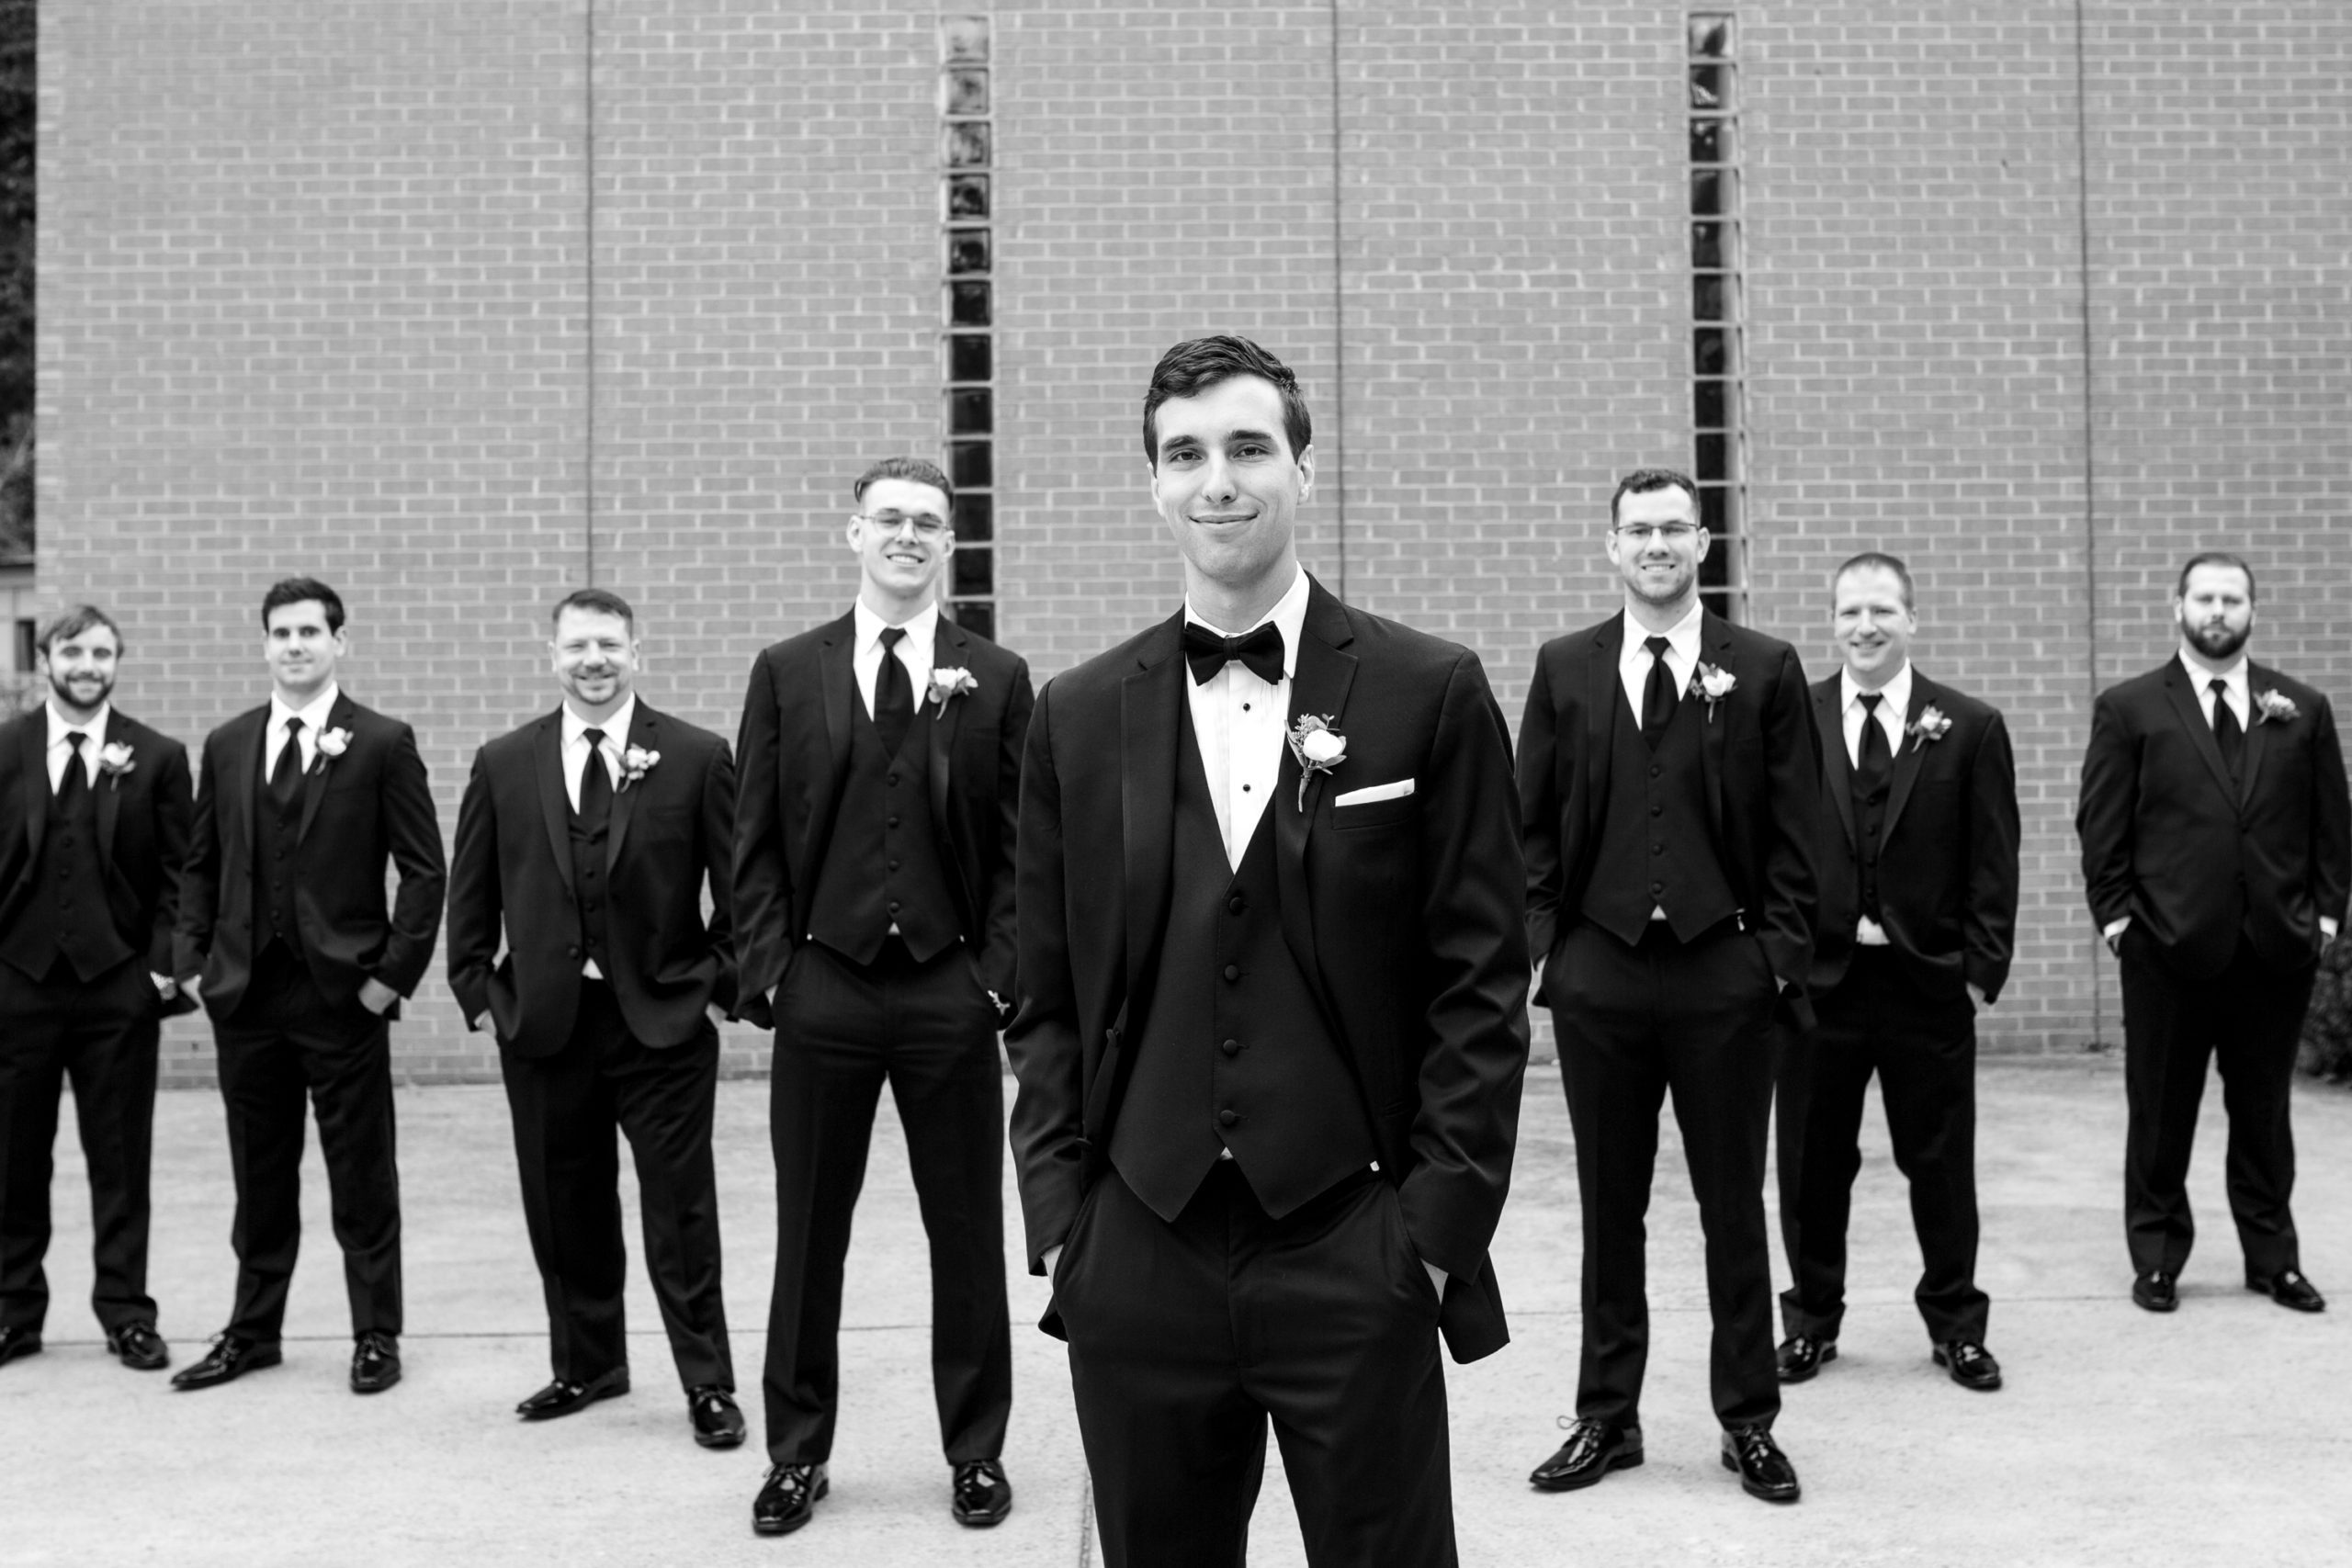 Groom and Groomsmen photos by Lyndsay Curtis Photography